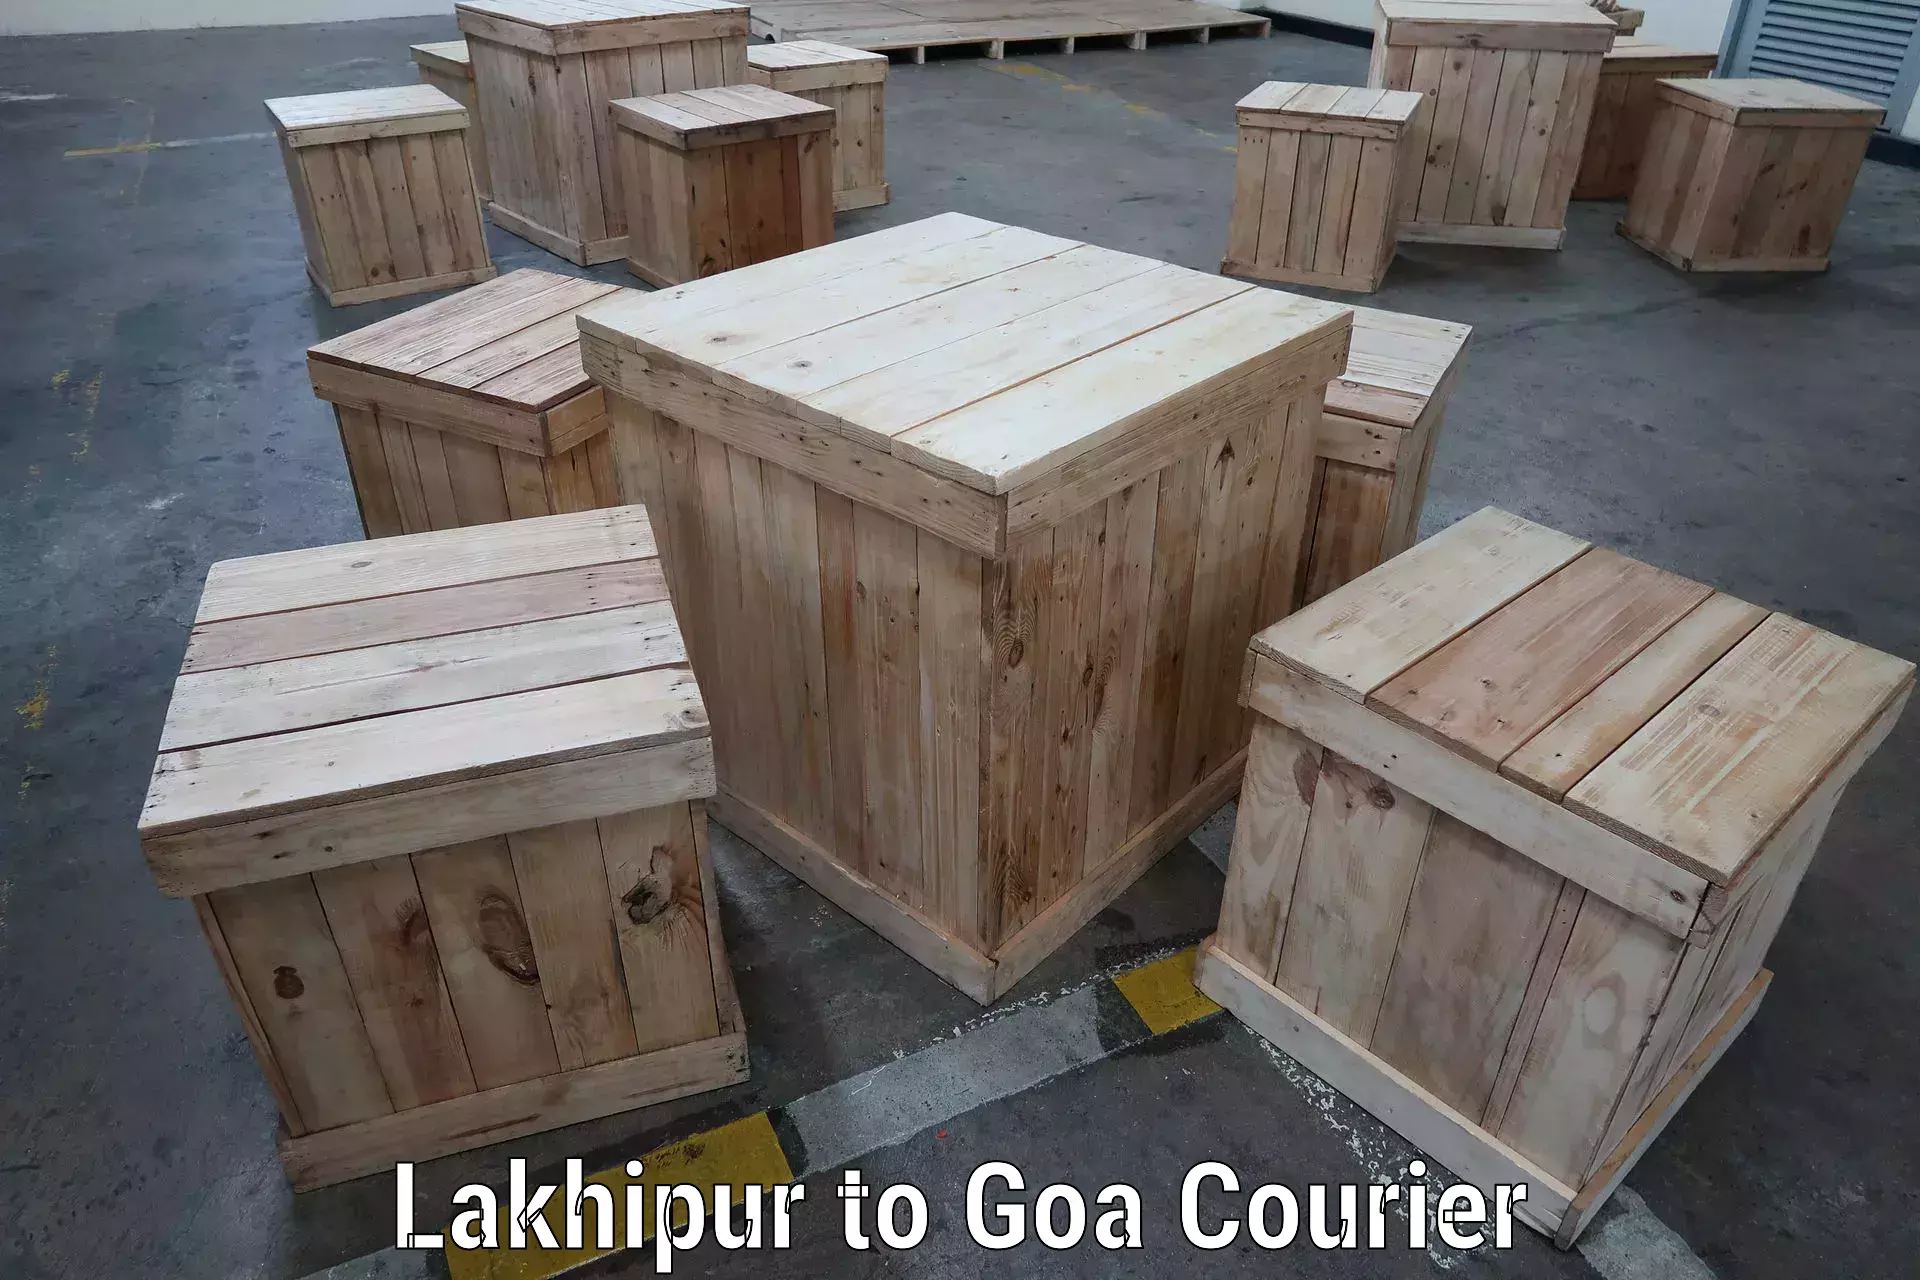 Express delivery capabilities Lakhipur to Goa